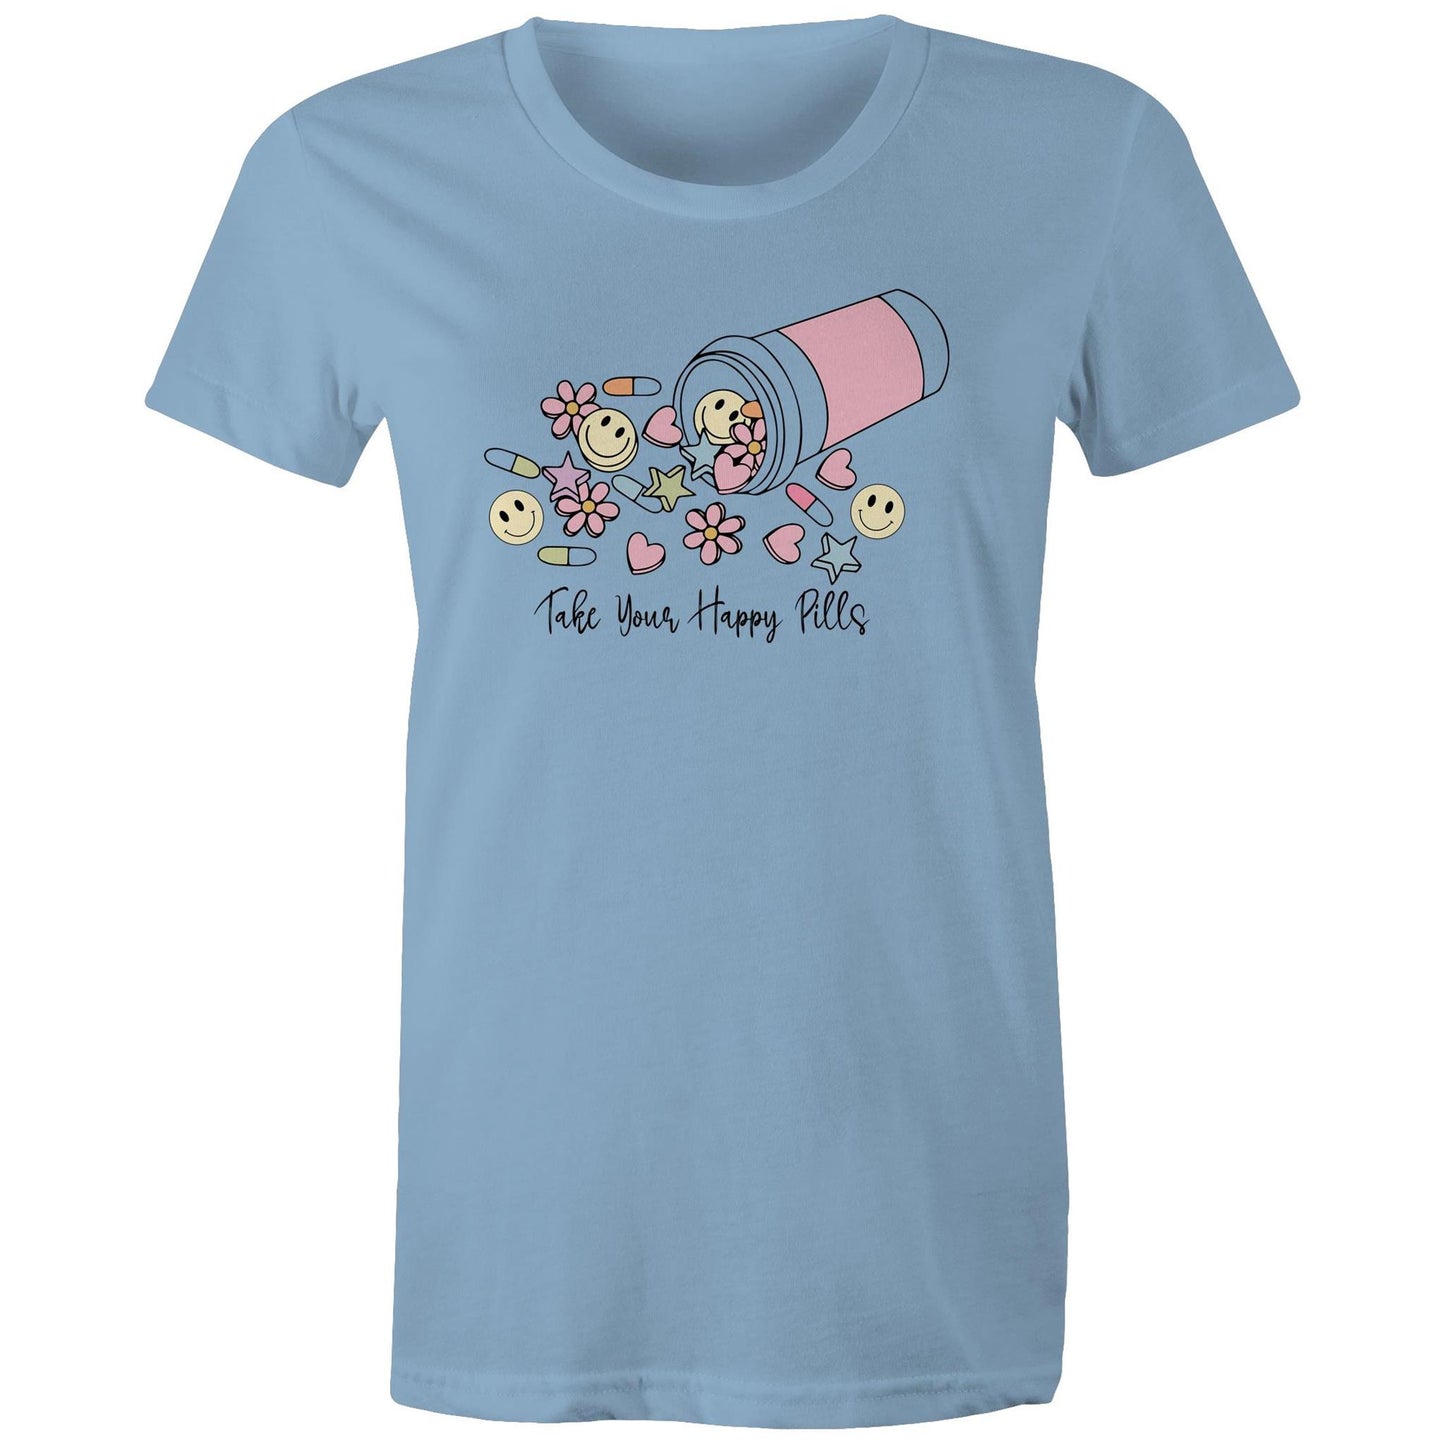 Womens Tee - Take Your Happy Pills